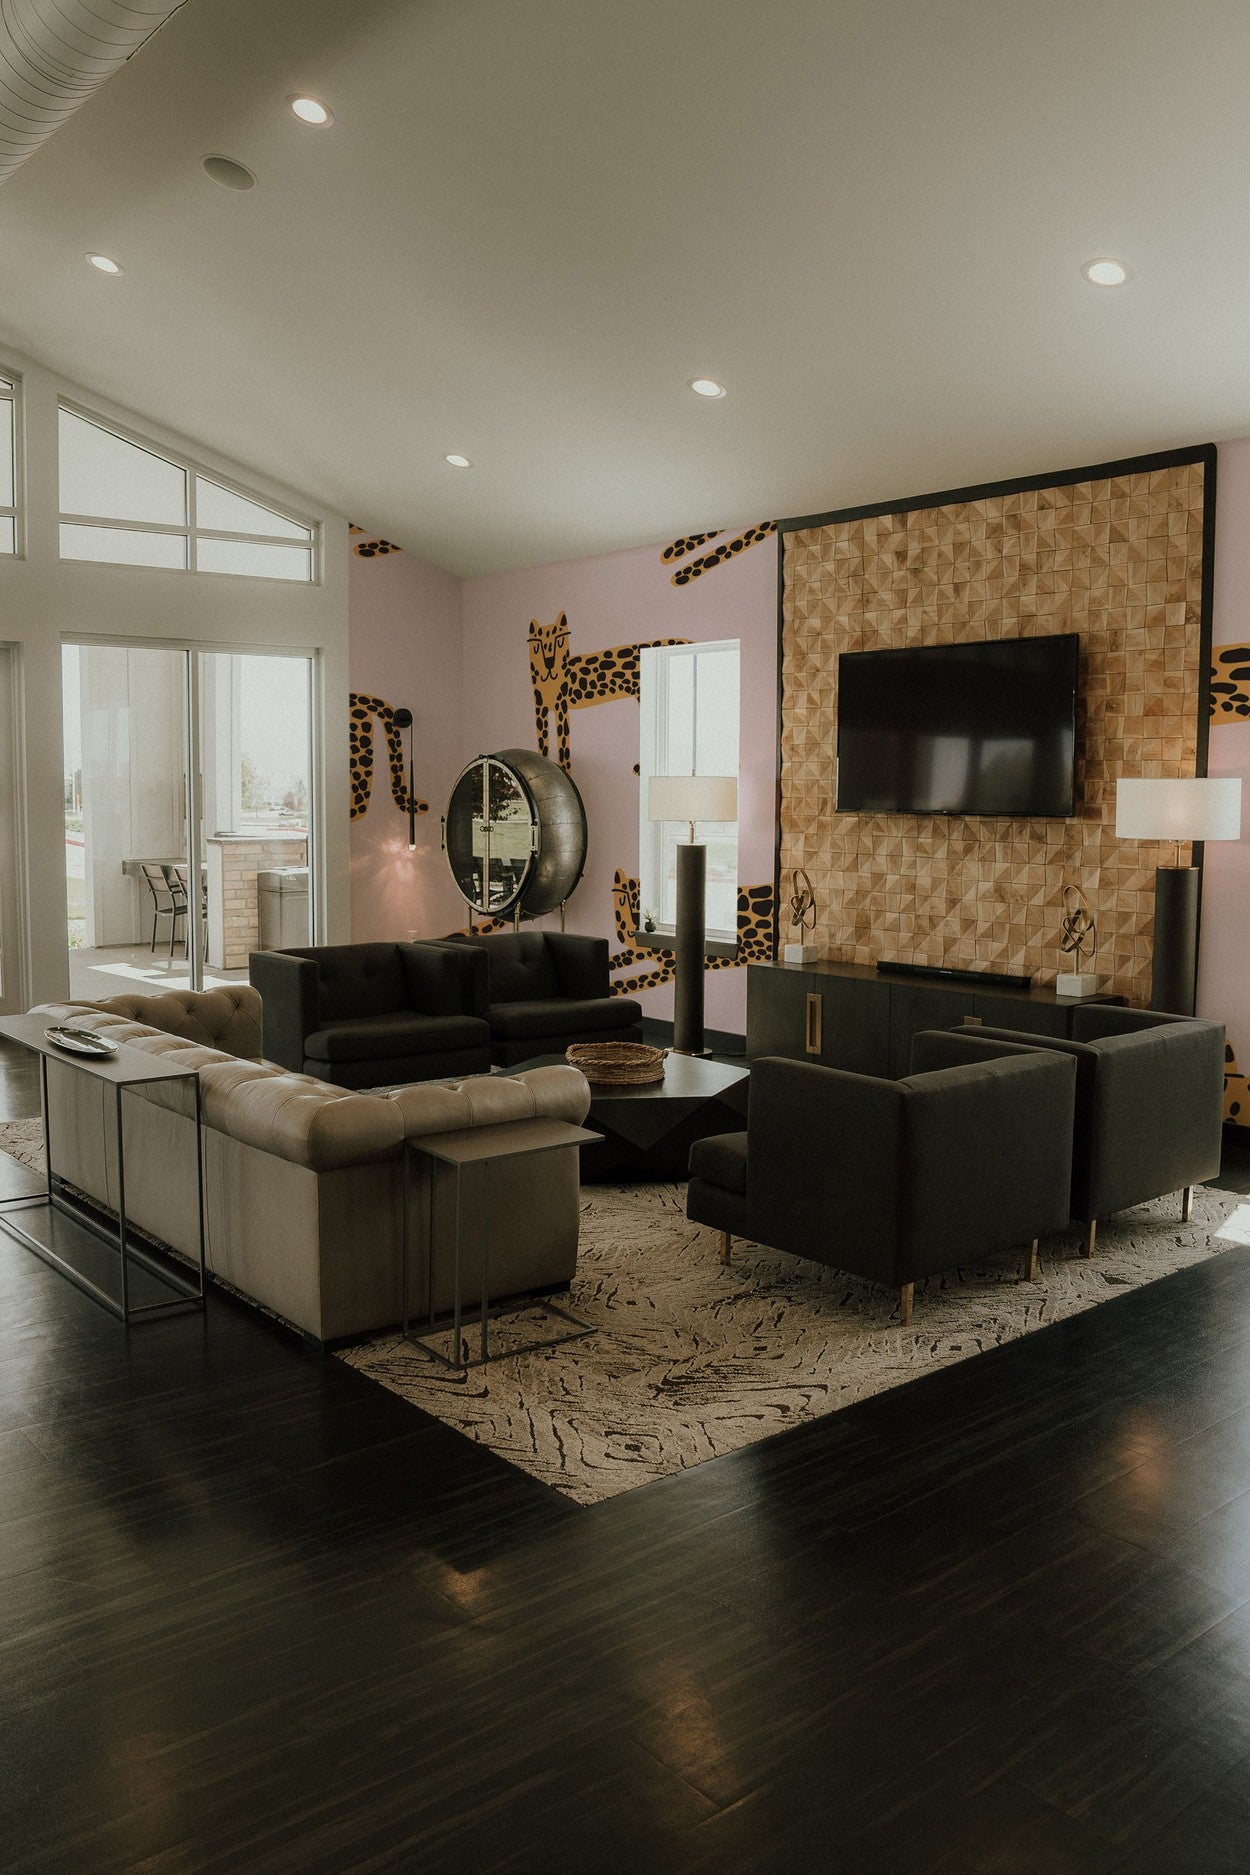 A stylish modern living room with dark hardwood floors and a large wall mural featuring animal print patterns.